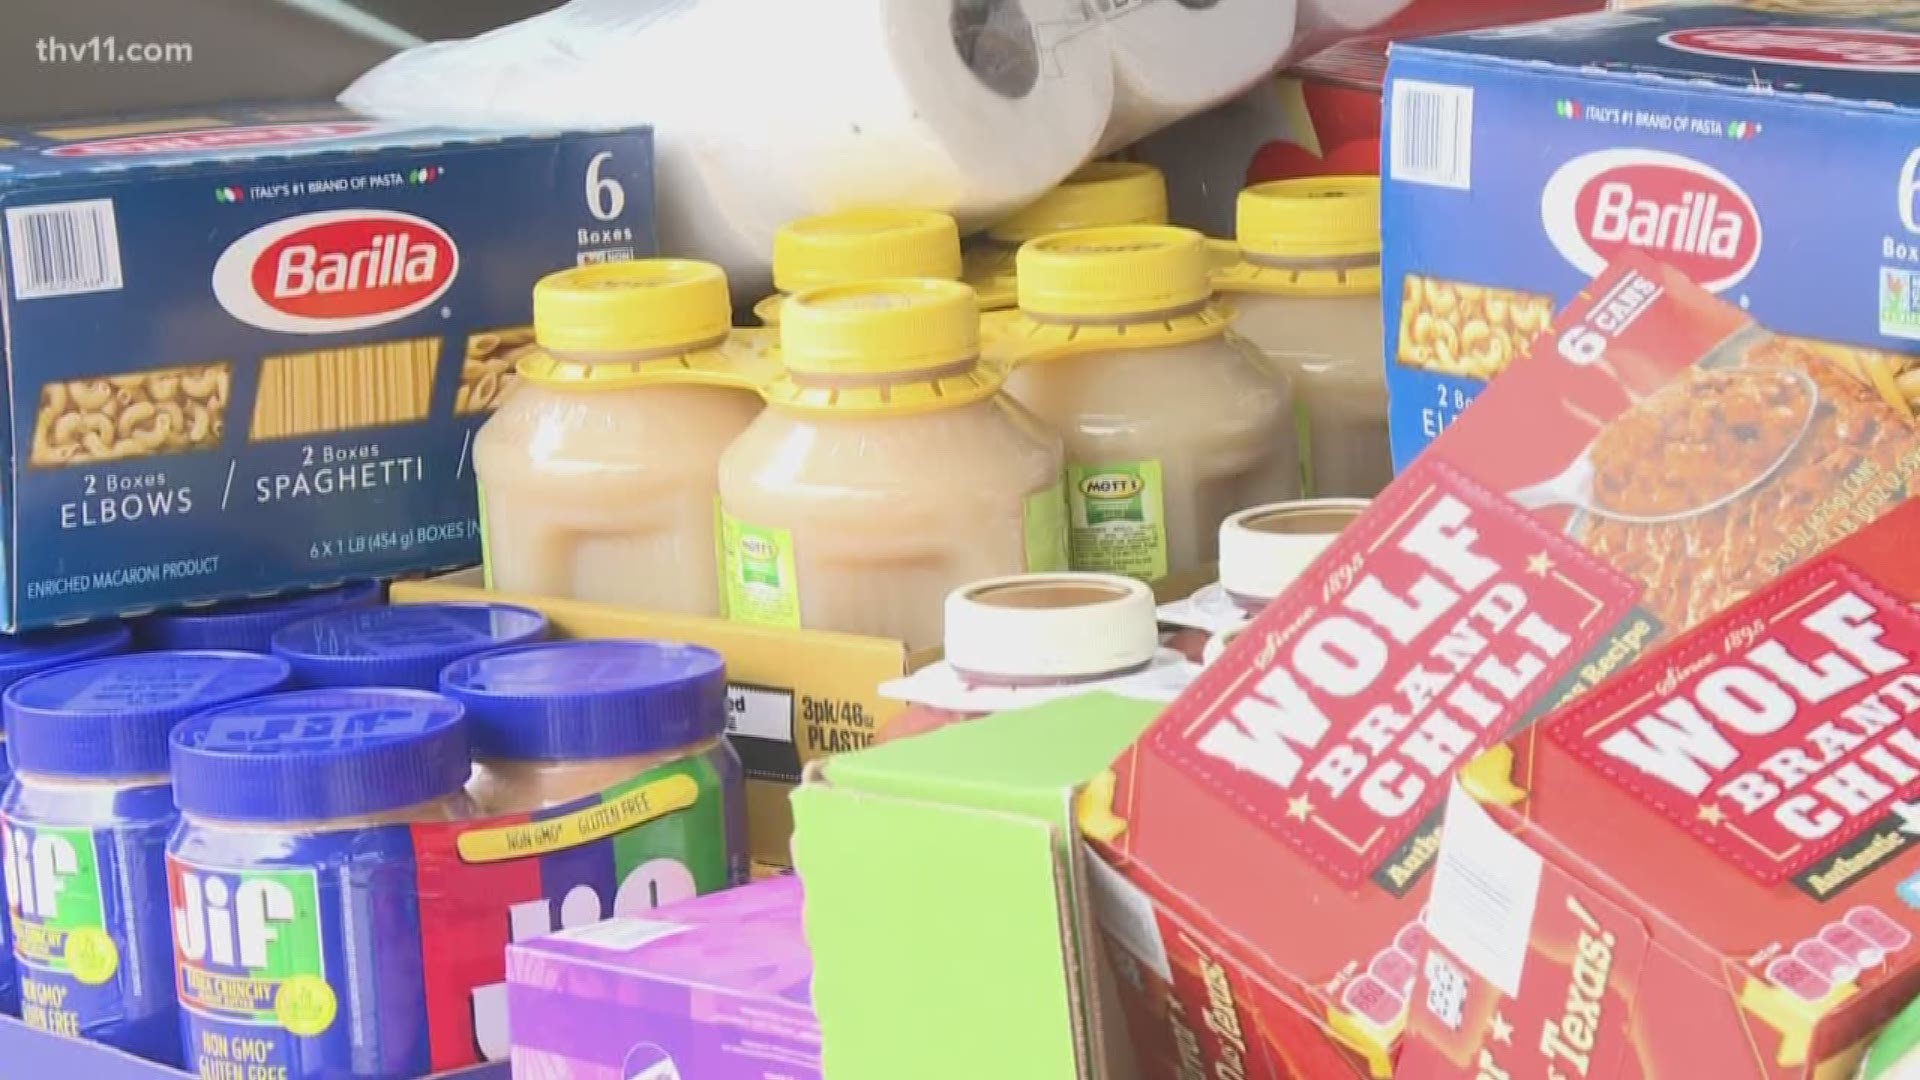 Donations are also pouring into barrels for the city-wide imitative called Little Rock Cares, which will benefit federal workers who are struggling.